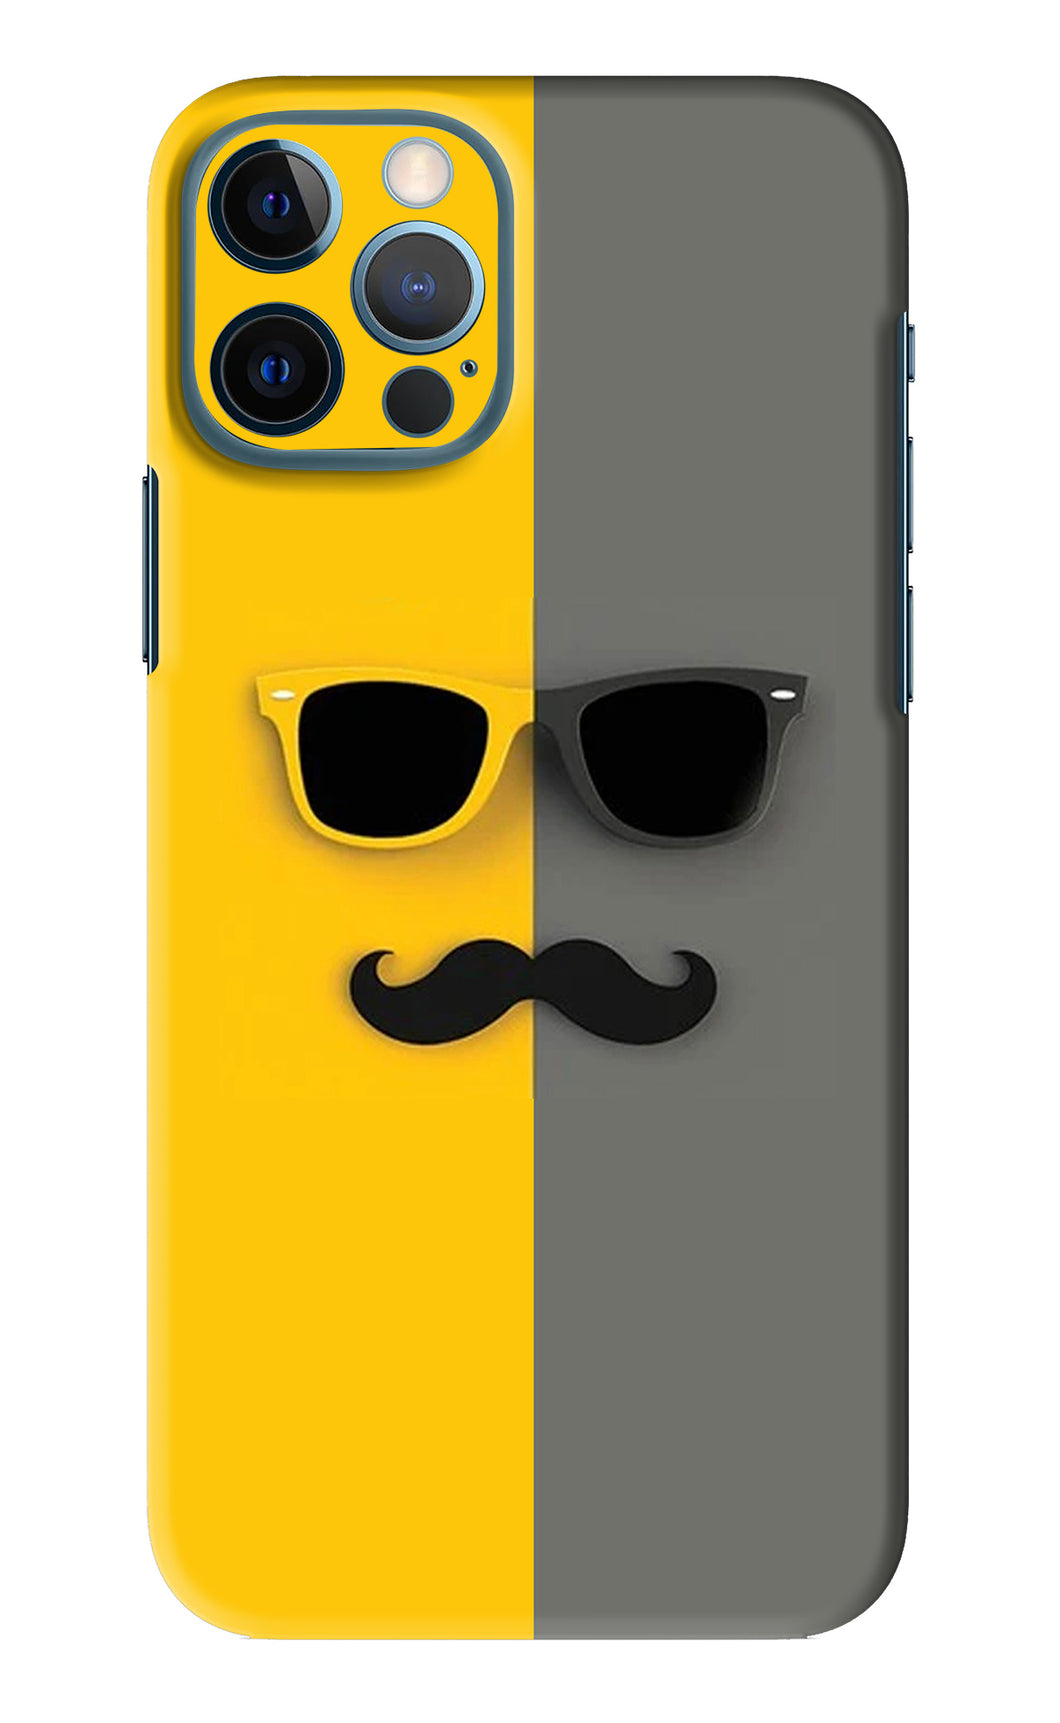 Sunglasses with Mustache iPhone 12 Pro Back Skin Wrap